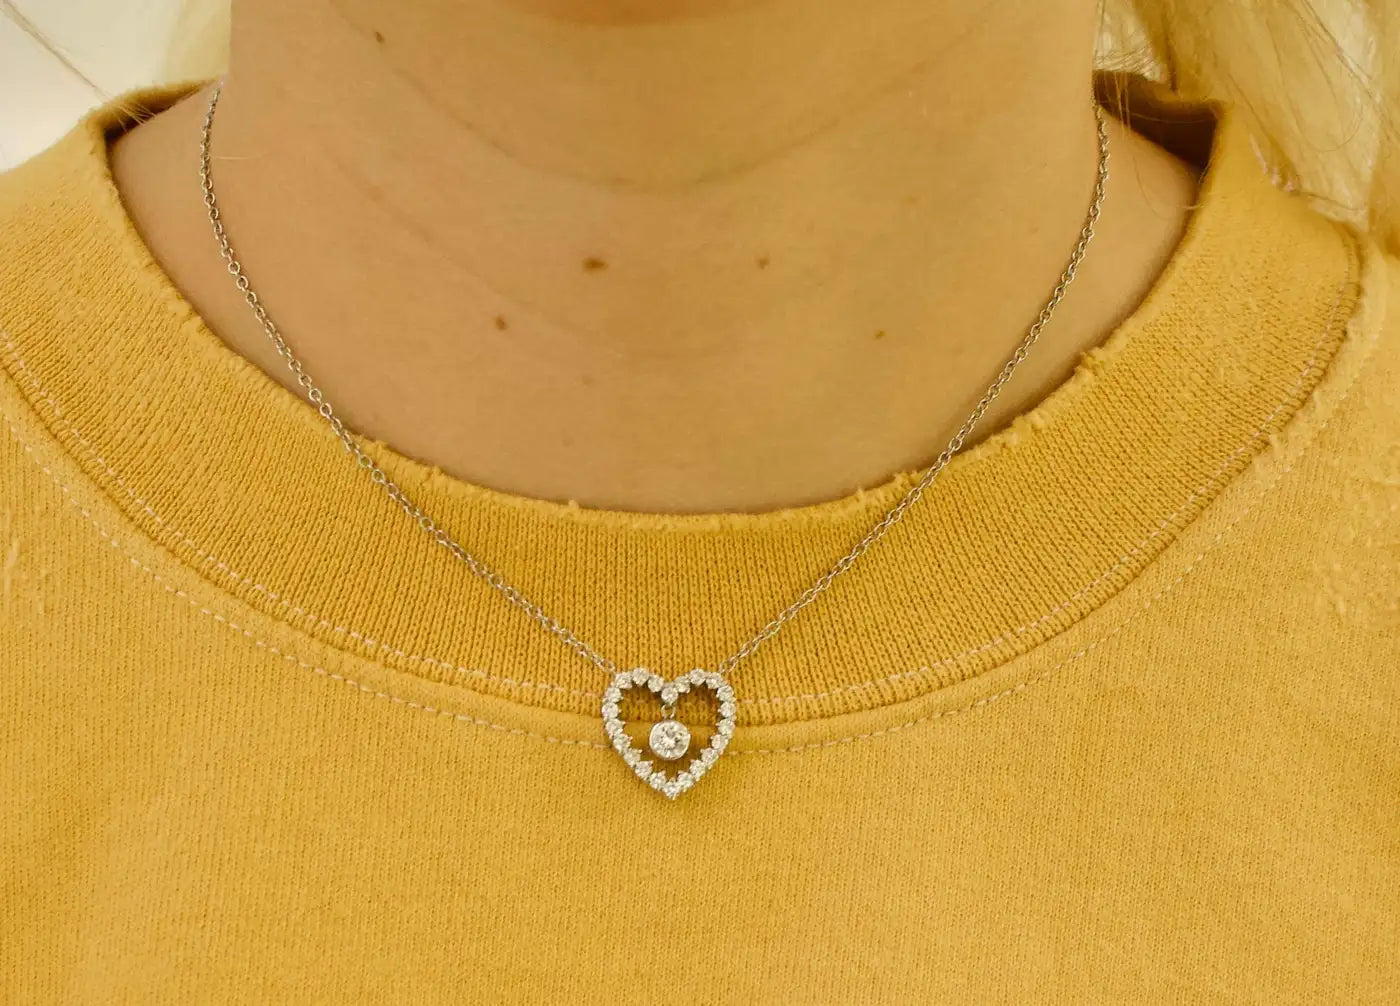 Platinum and Diamond Heart Necklace 1.05 Carats Total Weight